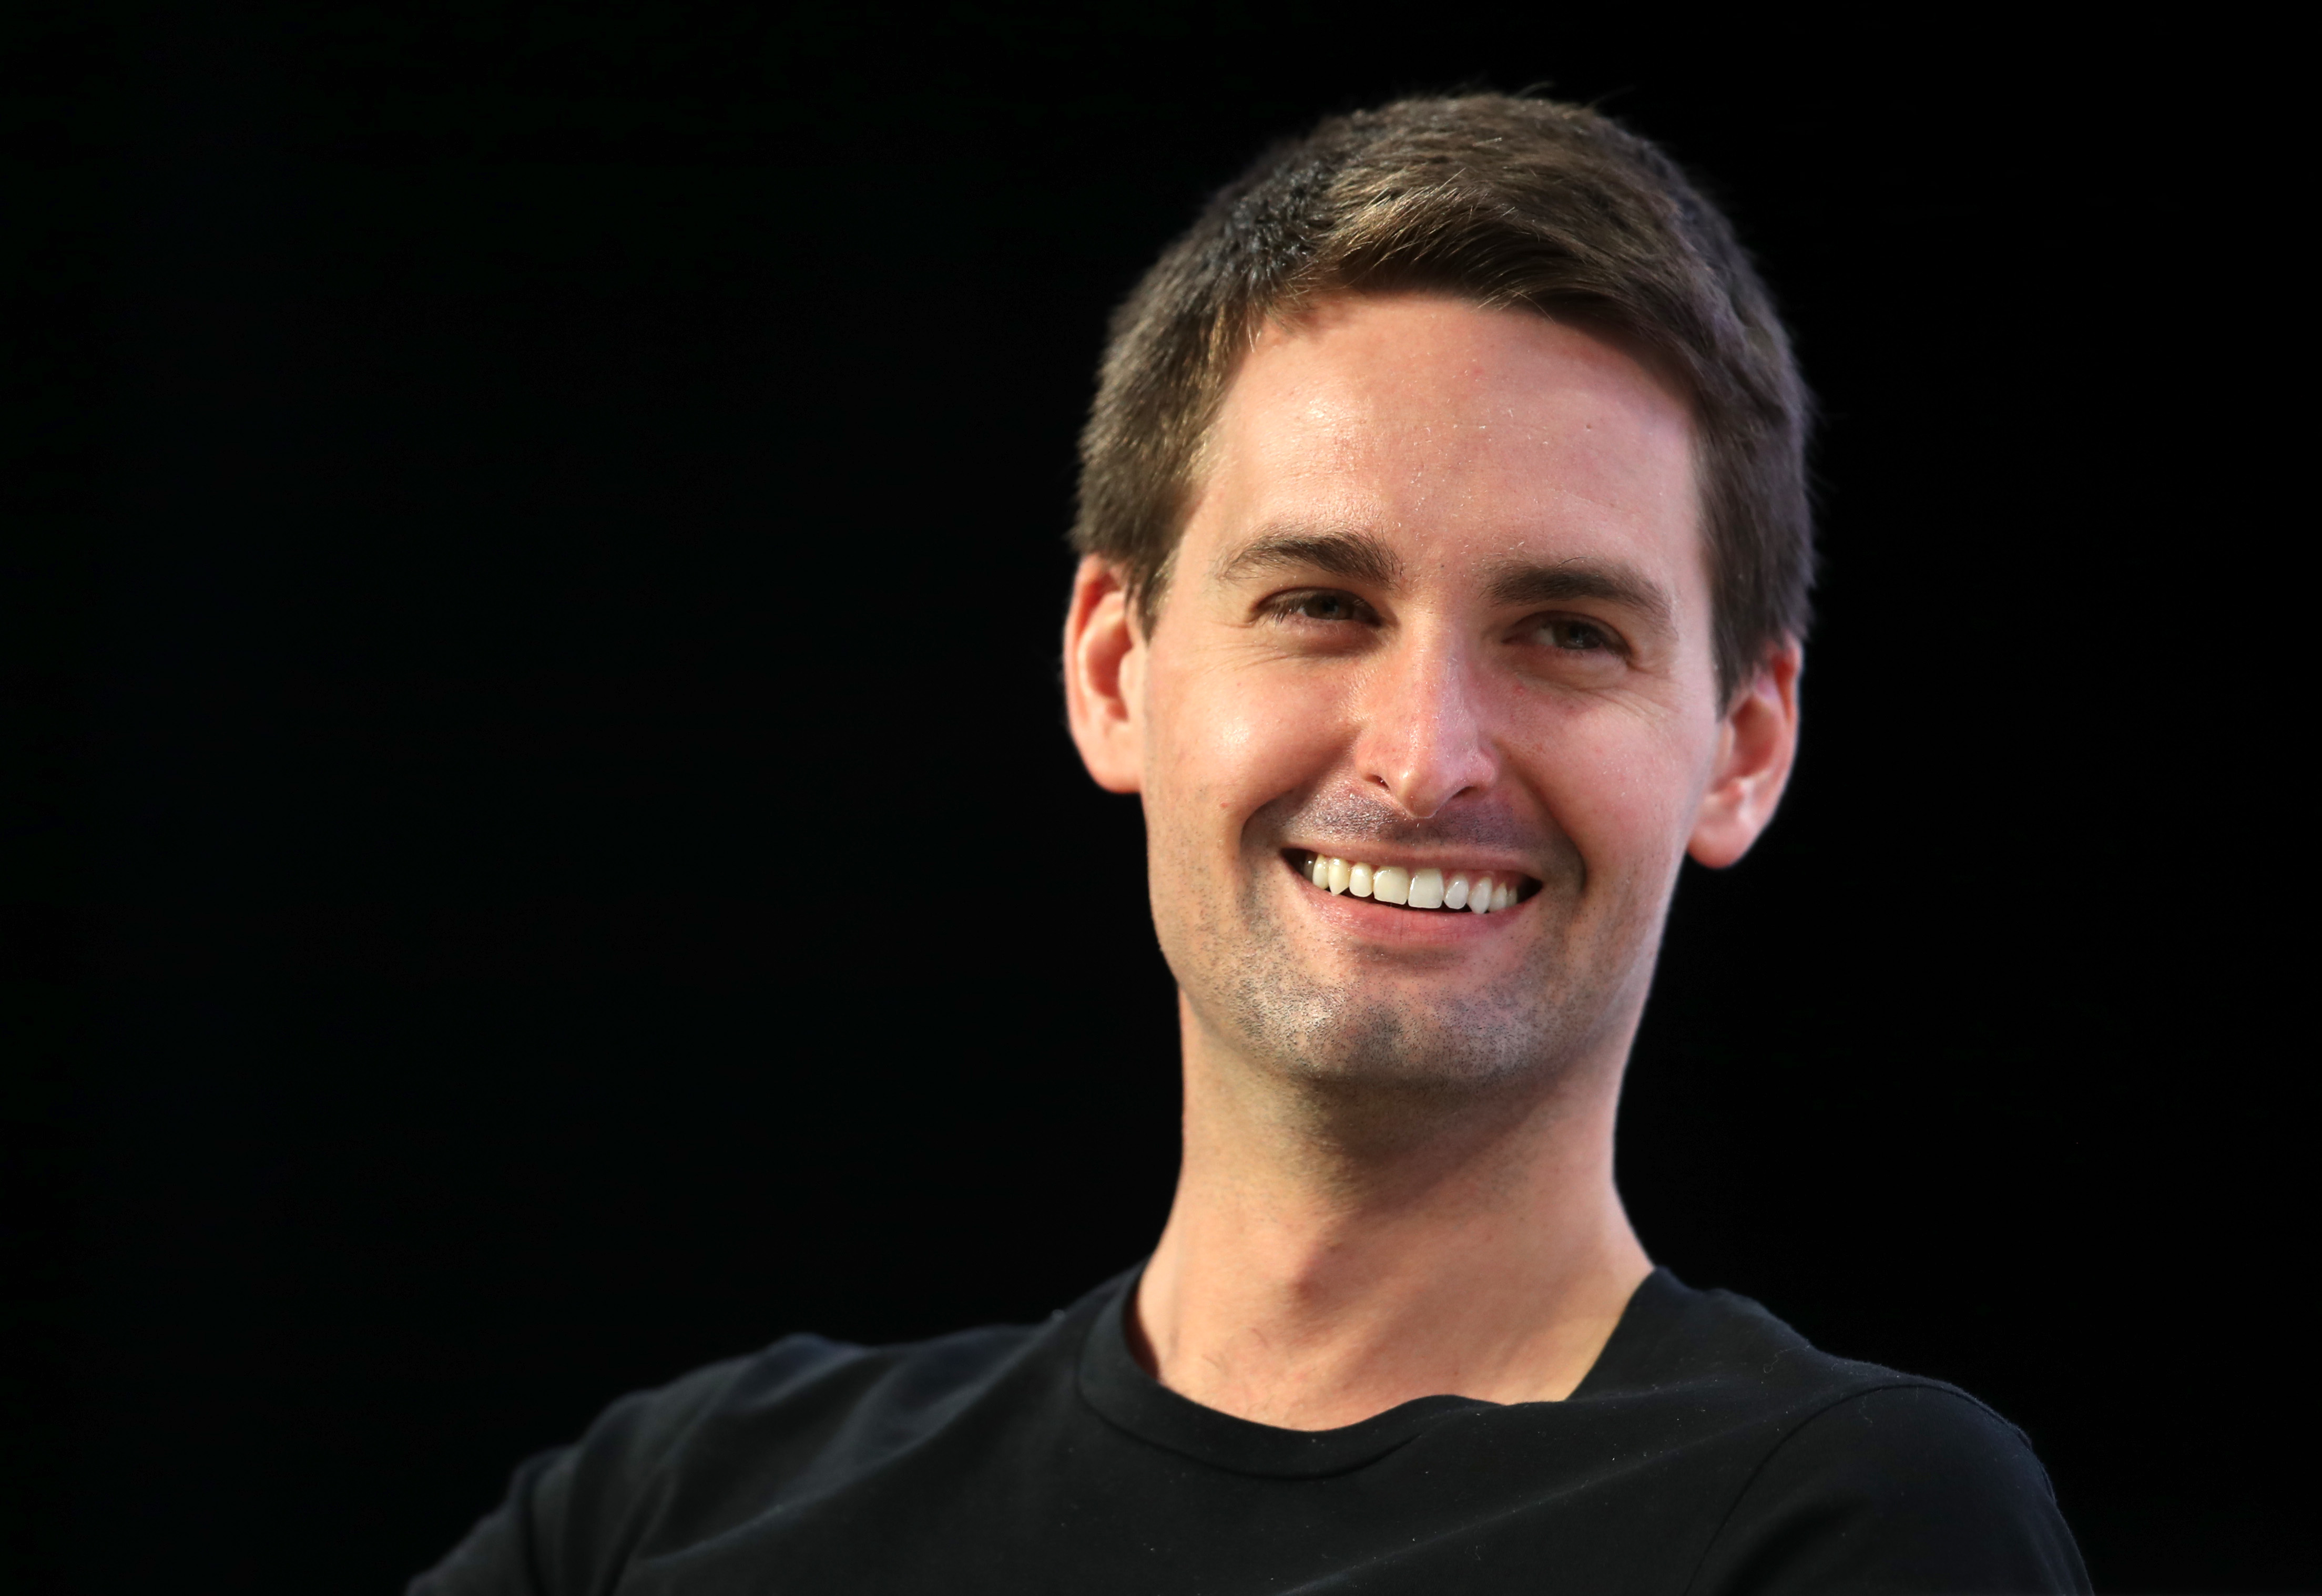 Evan Spiegel attends the Disrupt SF 2019 conference on October 4, 2019 in San Francisco, California | Source: Getty Images